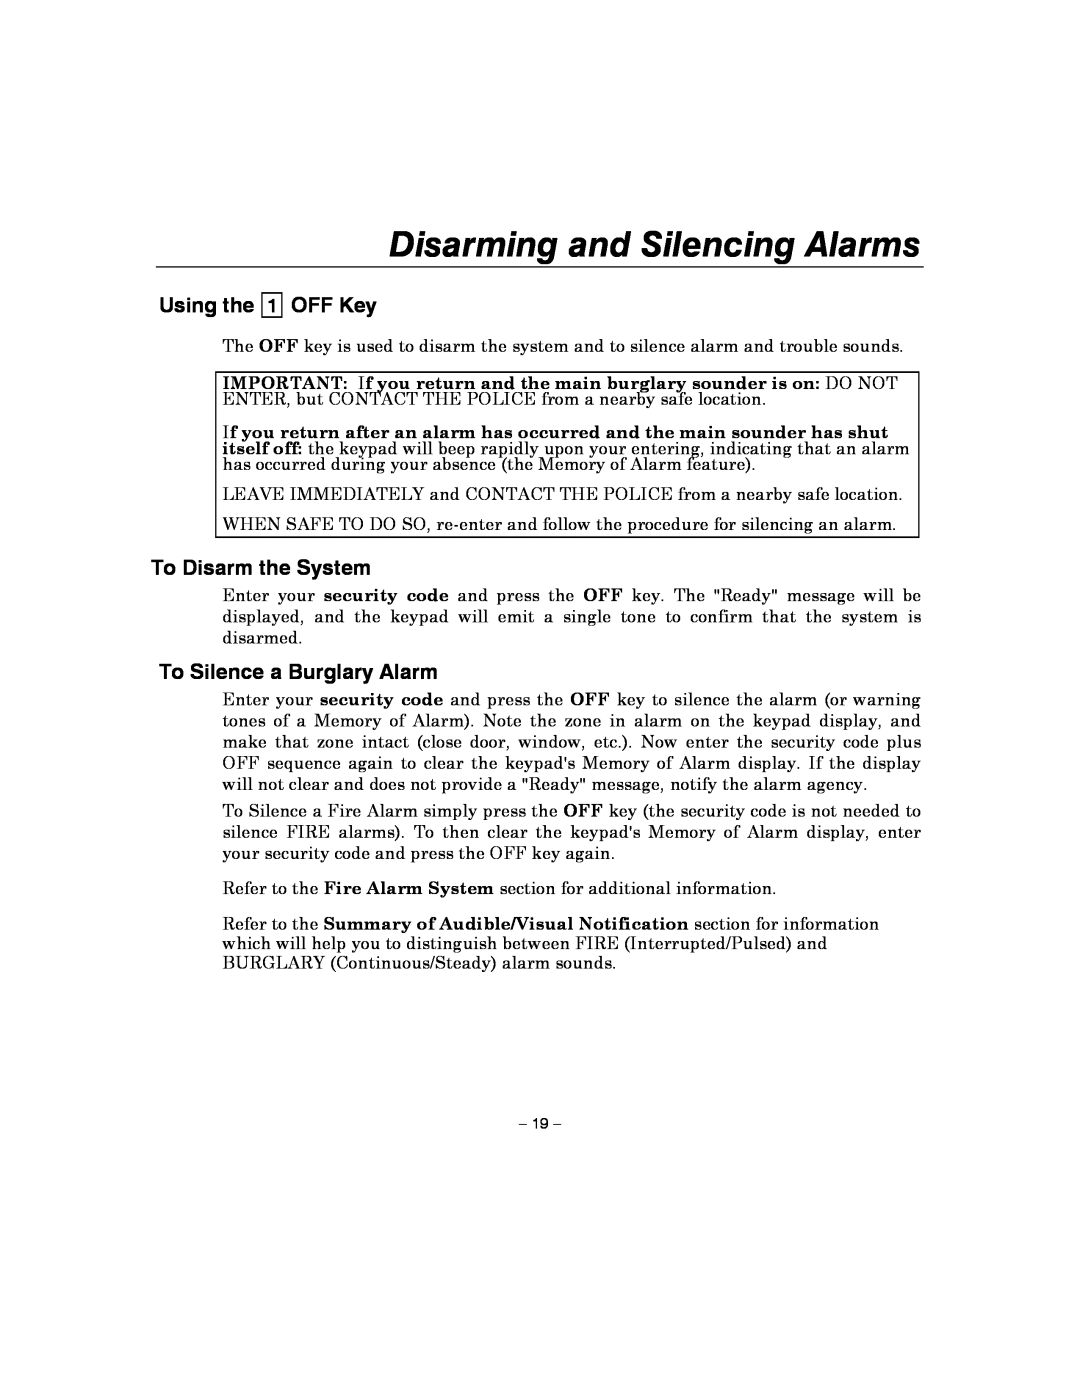 Honeywell 4110XM Disarming and Silencing Alarms, OFF Key, To Disarm the System, To Silence a Burglary Alarm, Using the 